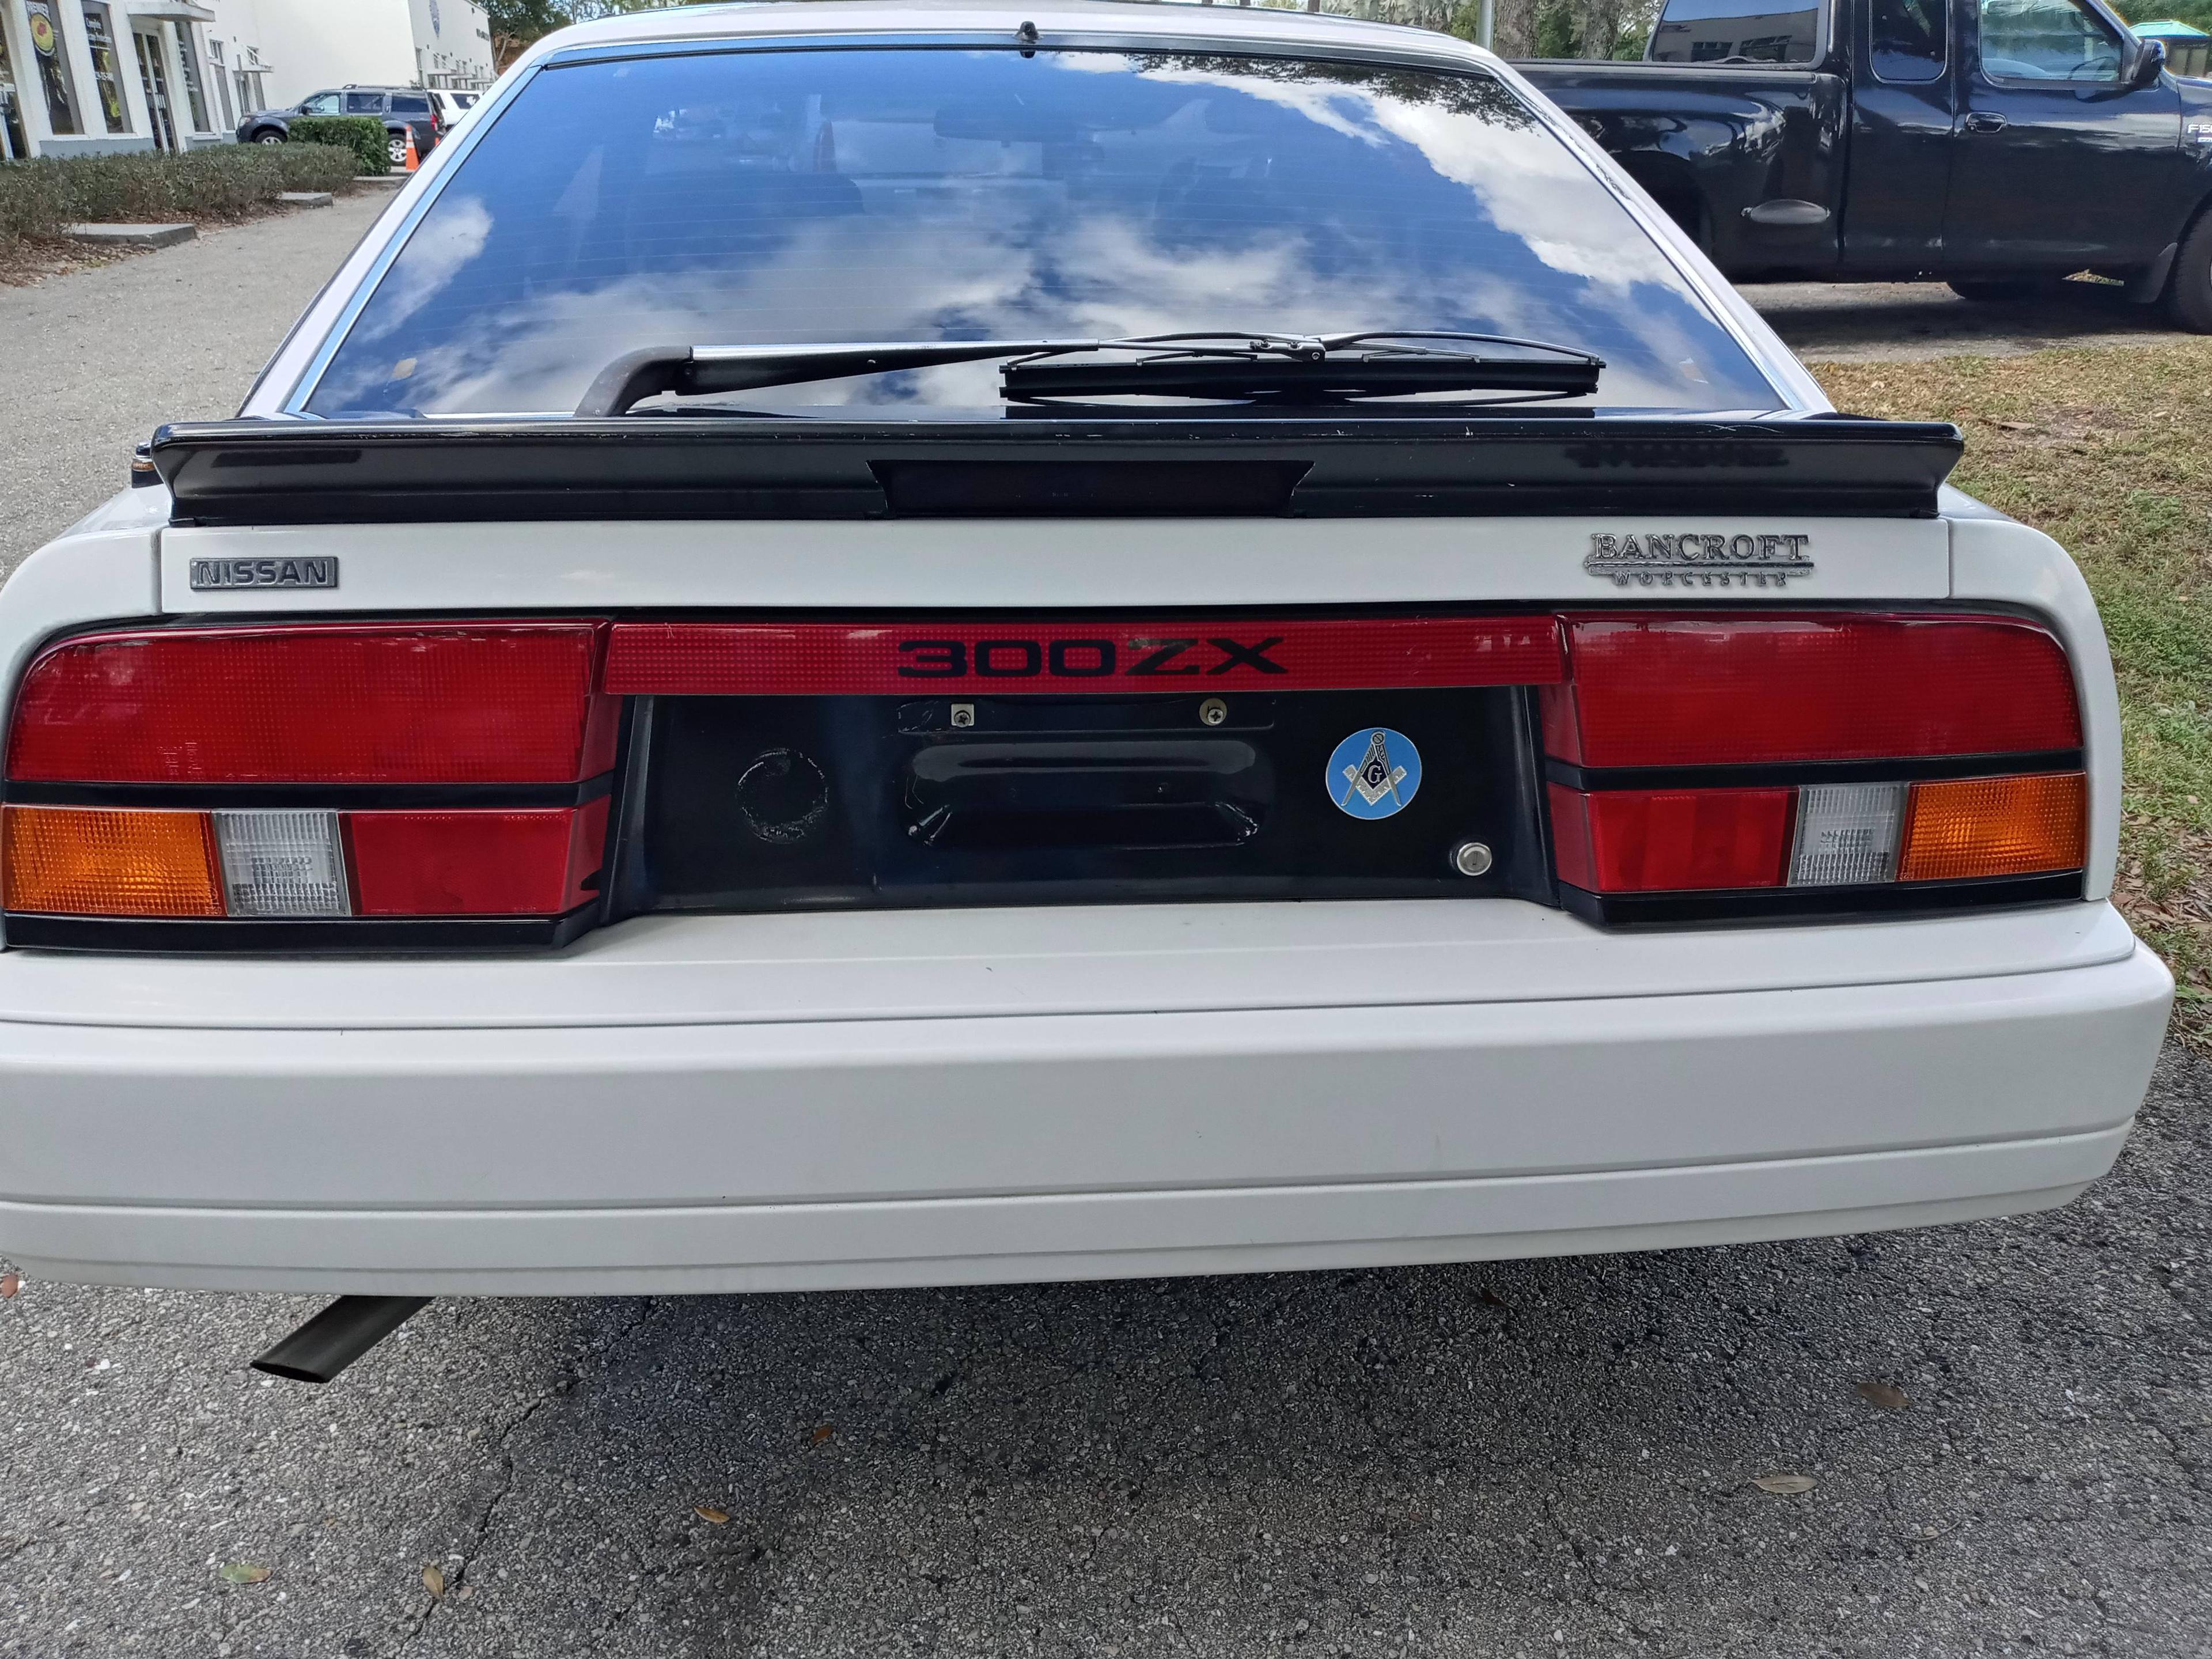 1986 Nissan 300ZX Coupe. 3.0L V6 engine. 5 speed manual transmission. Power